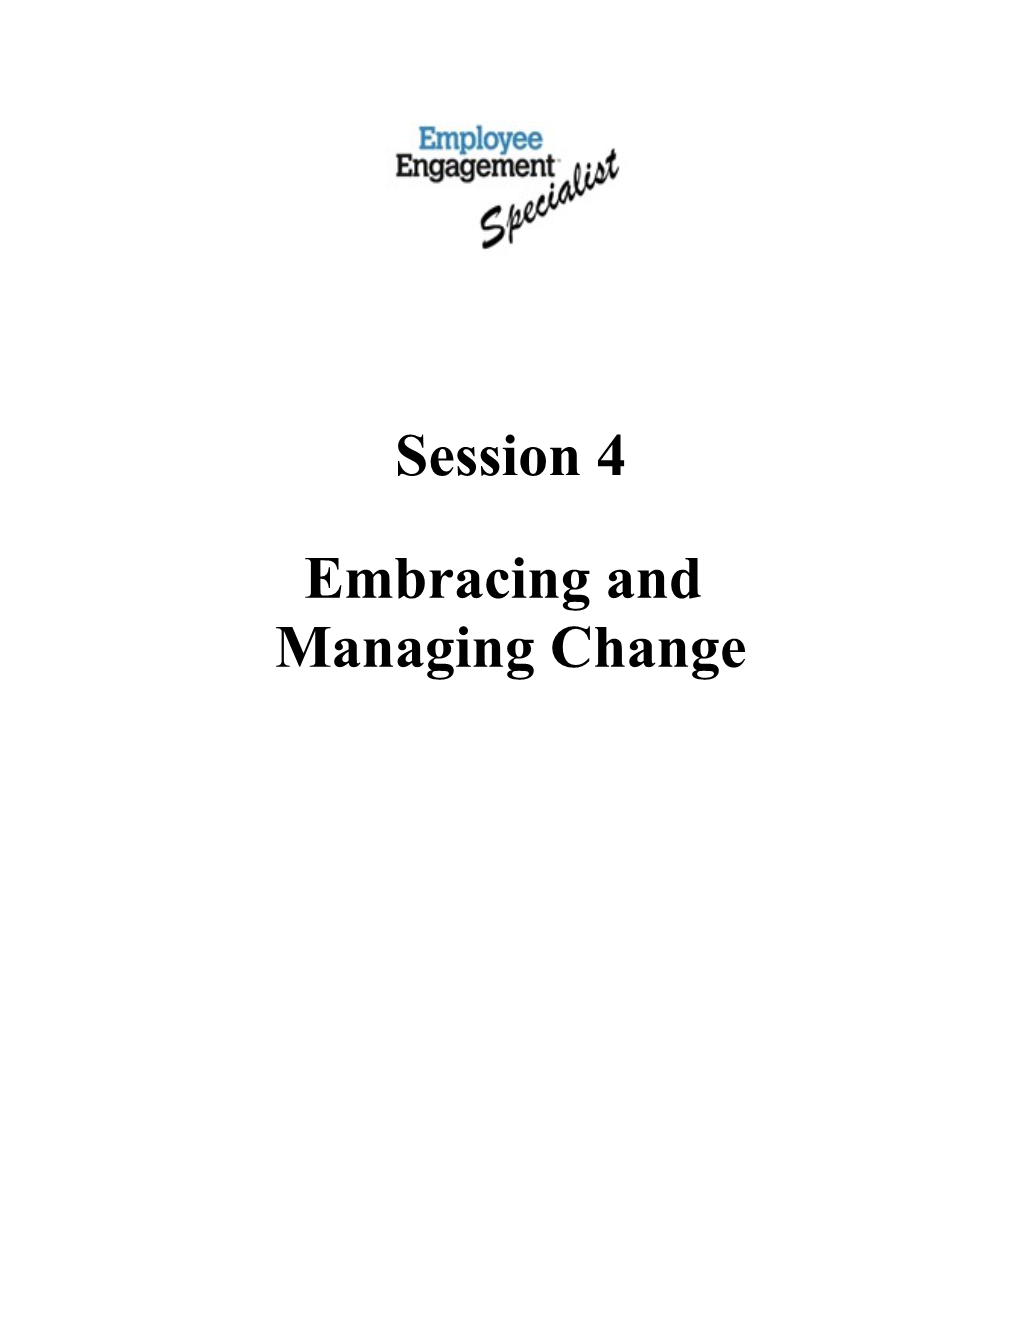 Session 4 Leading and Managing Change and Engaging the First-Line Leader